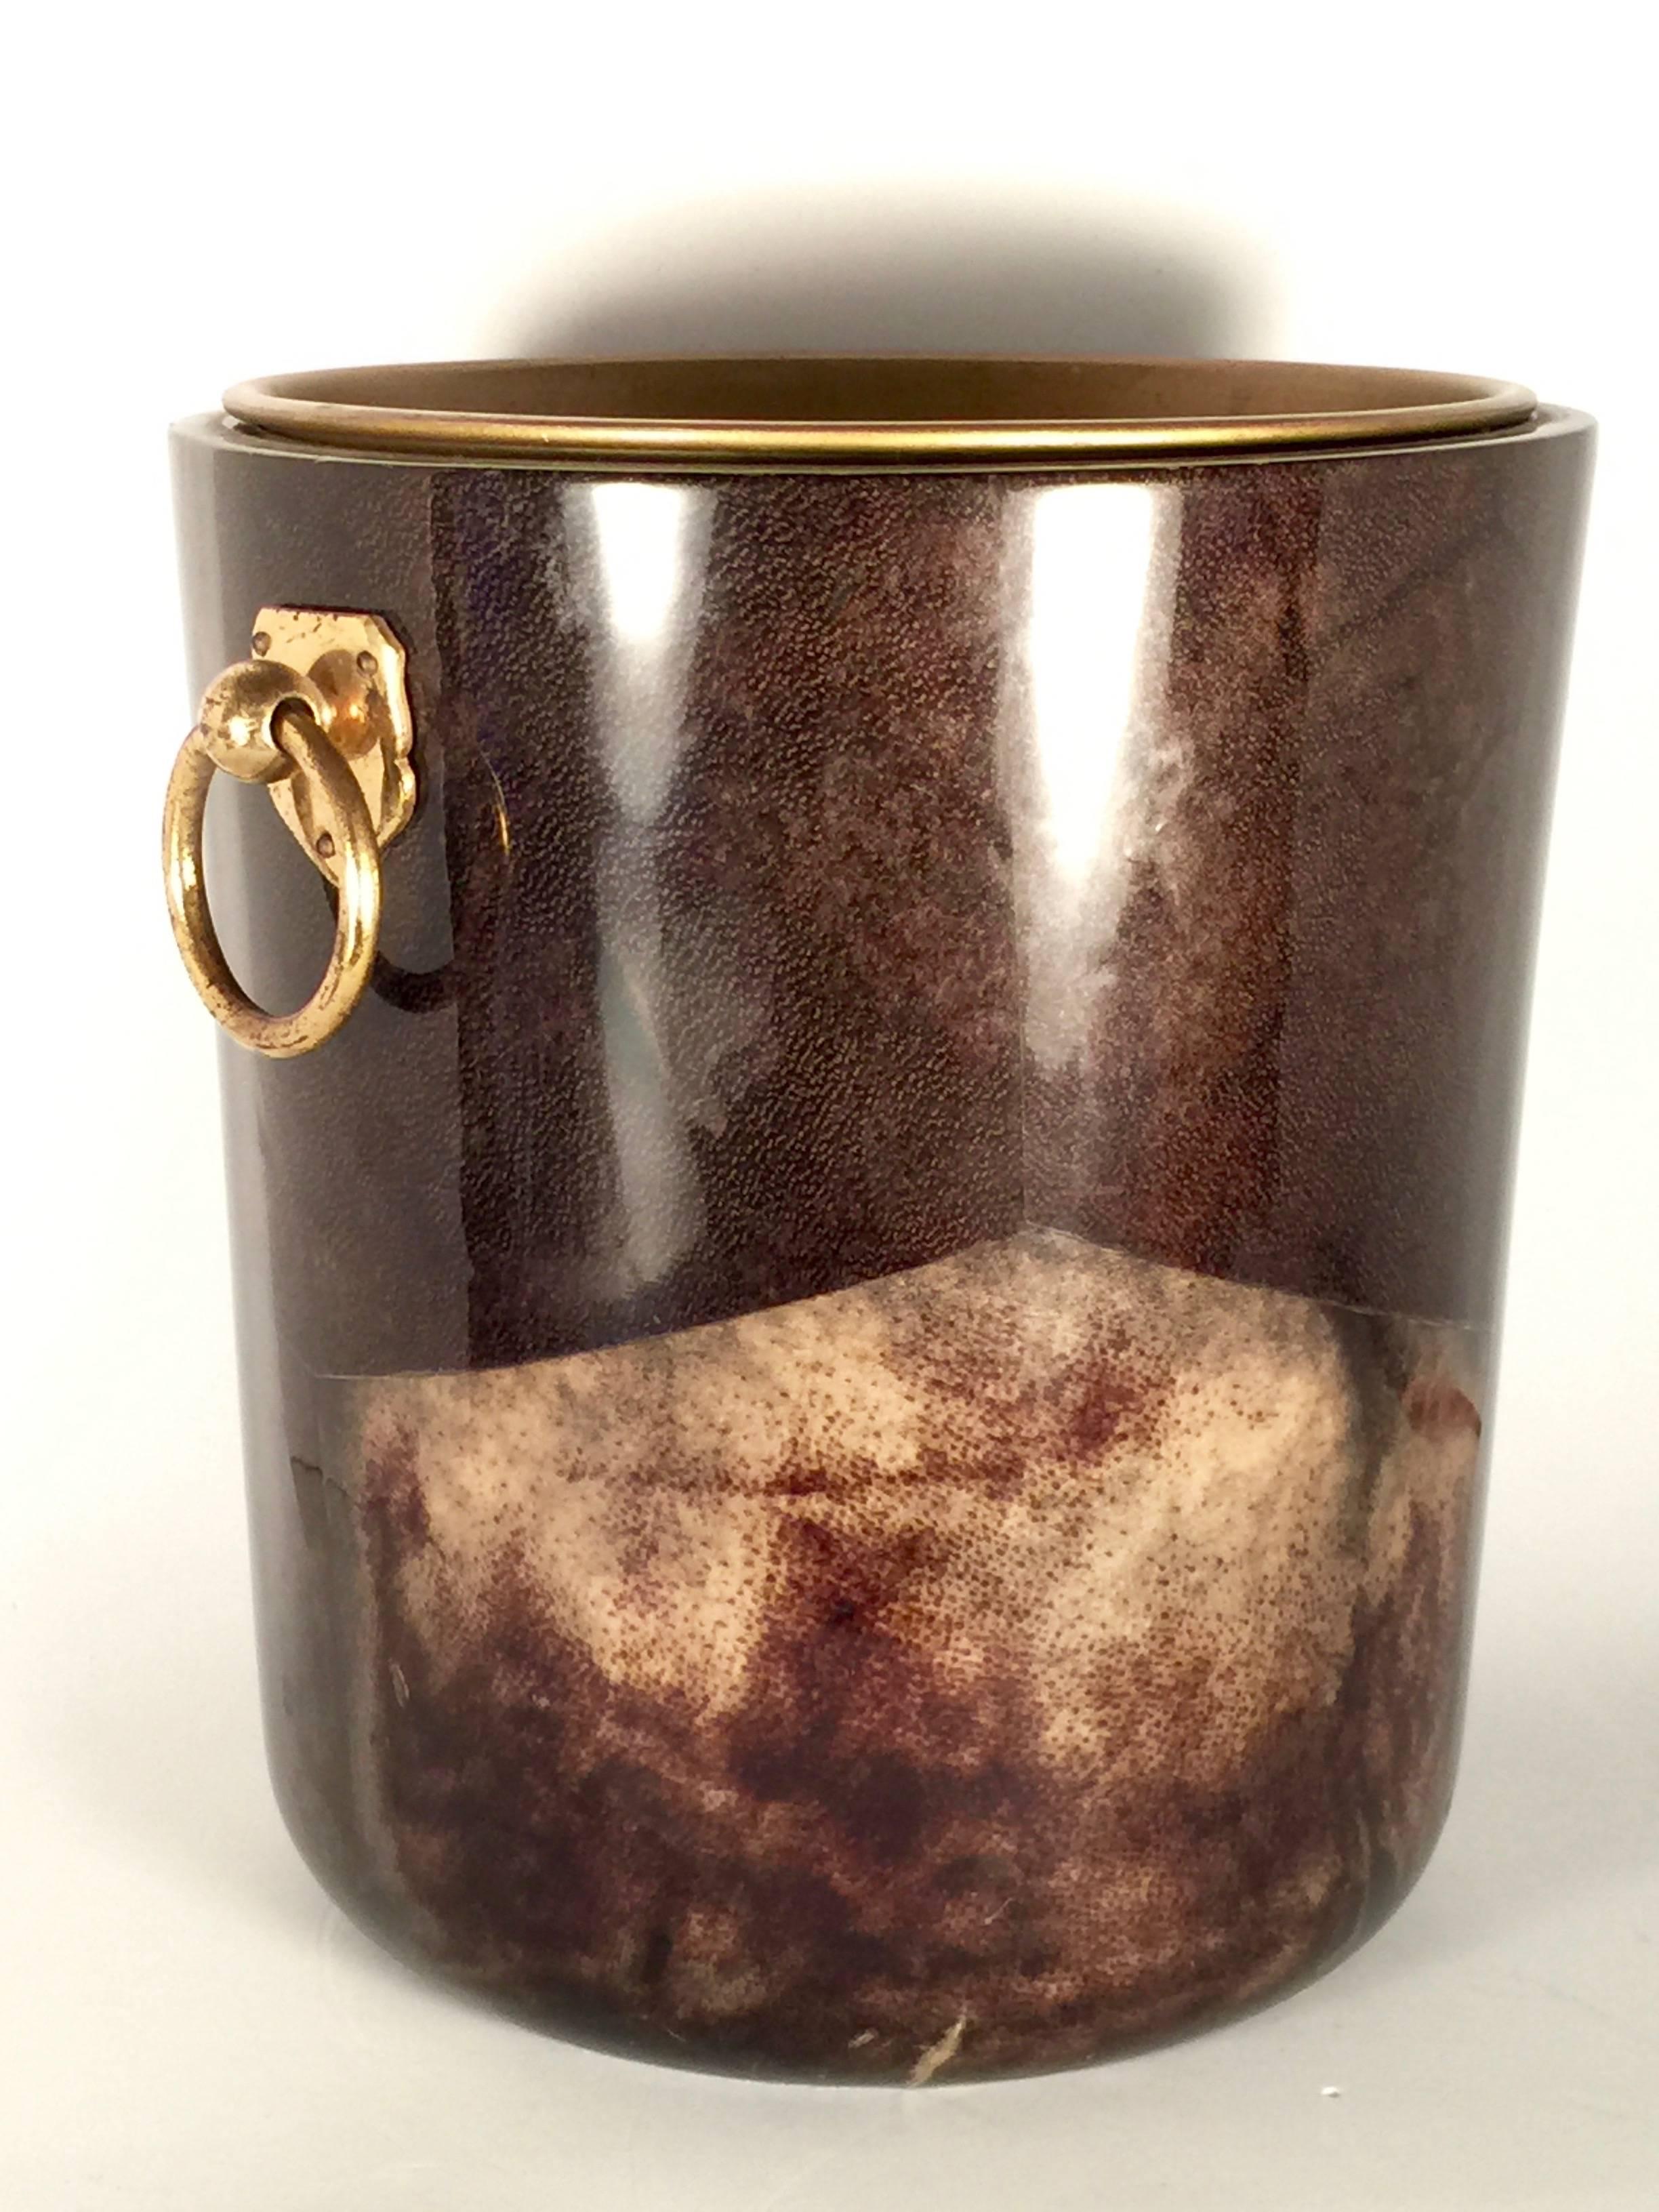 Vintage Aldo Tura tobacco brown lacquered goatskin and brass ice bucket
1940s made in Italy.

This piece is in good vintage condition with porous grains on the brass details.

An amazing and seldom piece in this condition.